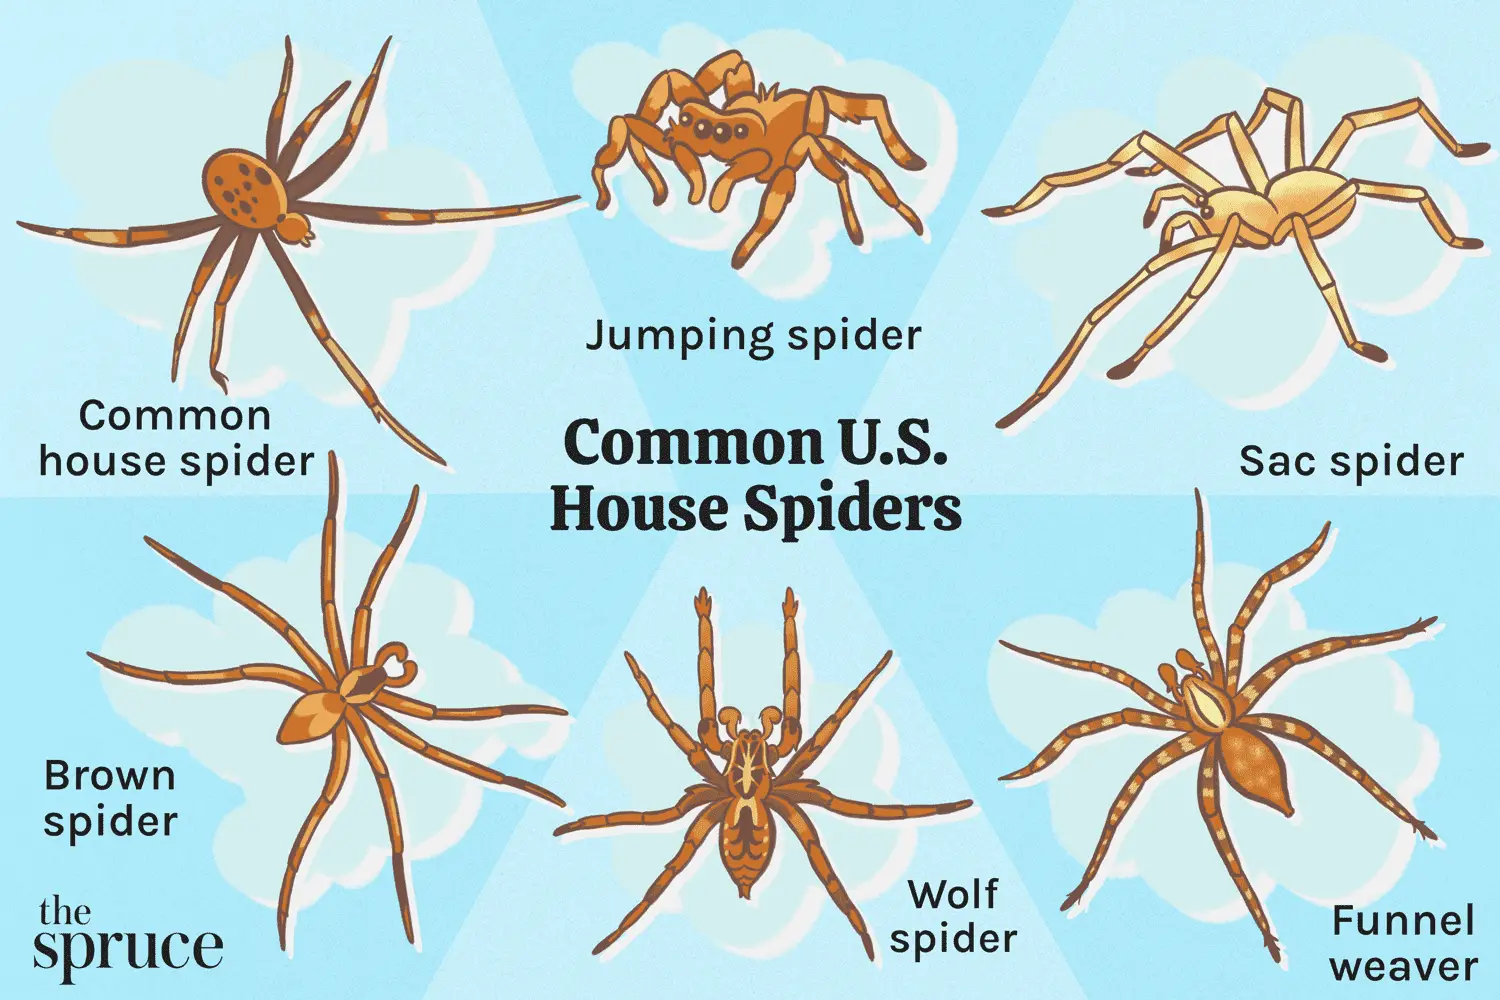 What are the most common spider species found in homes